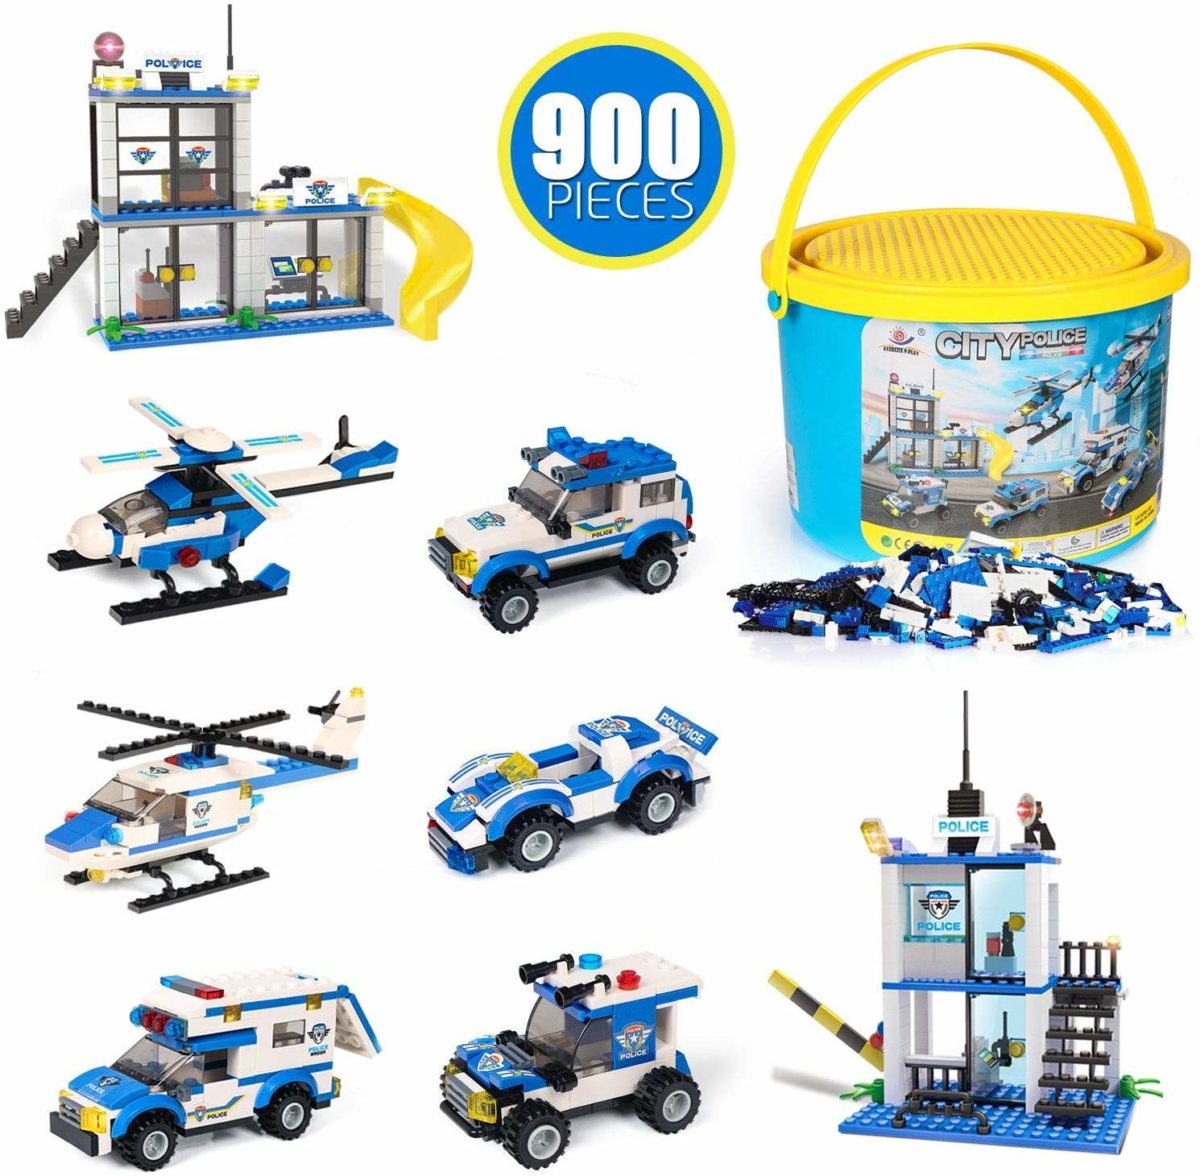 Building Blocks Toys City Police Station - Top Toys and Gifts for Seven Year Old Boys 1